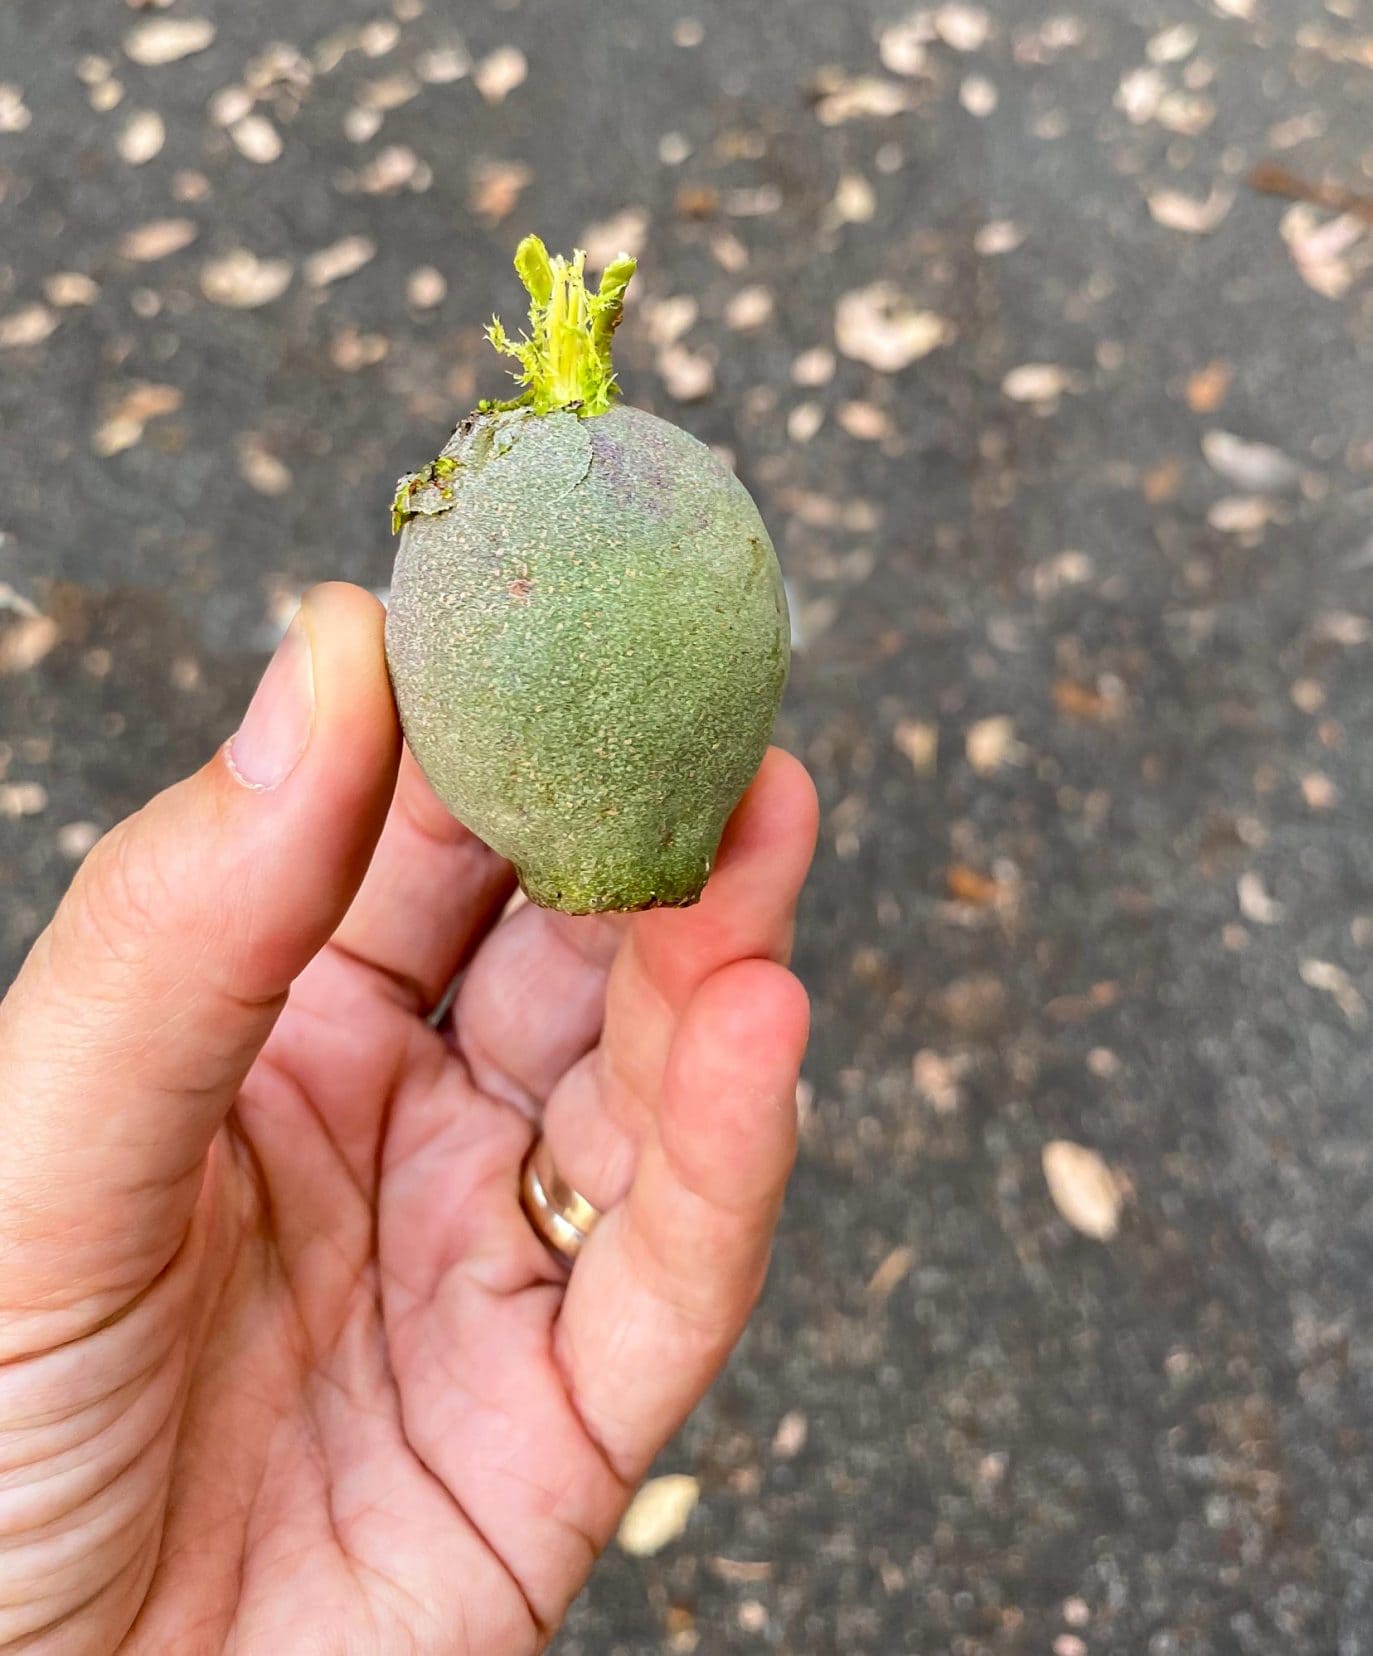 one of the marri seeds that were falling all around us as the cockatoos munched on them above causing them to drop - its a nut about the size of an egg 